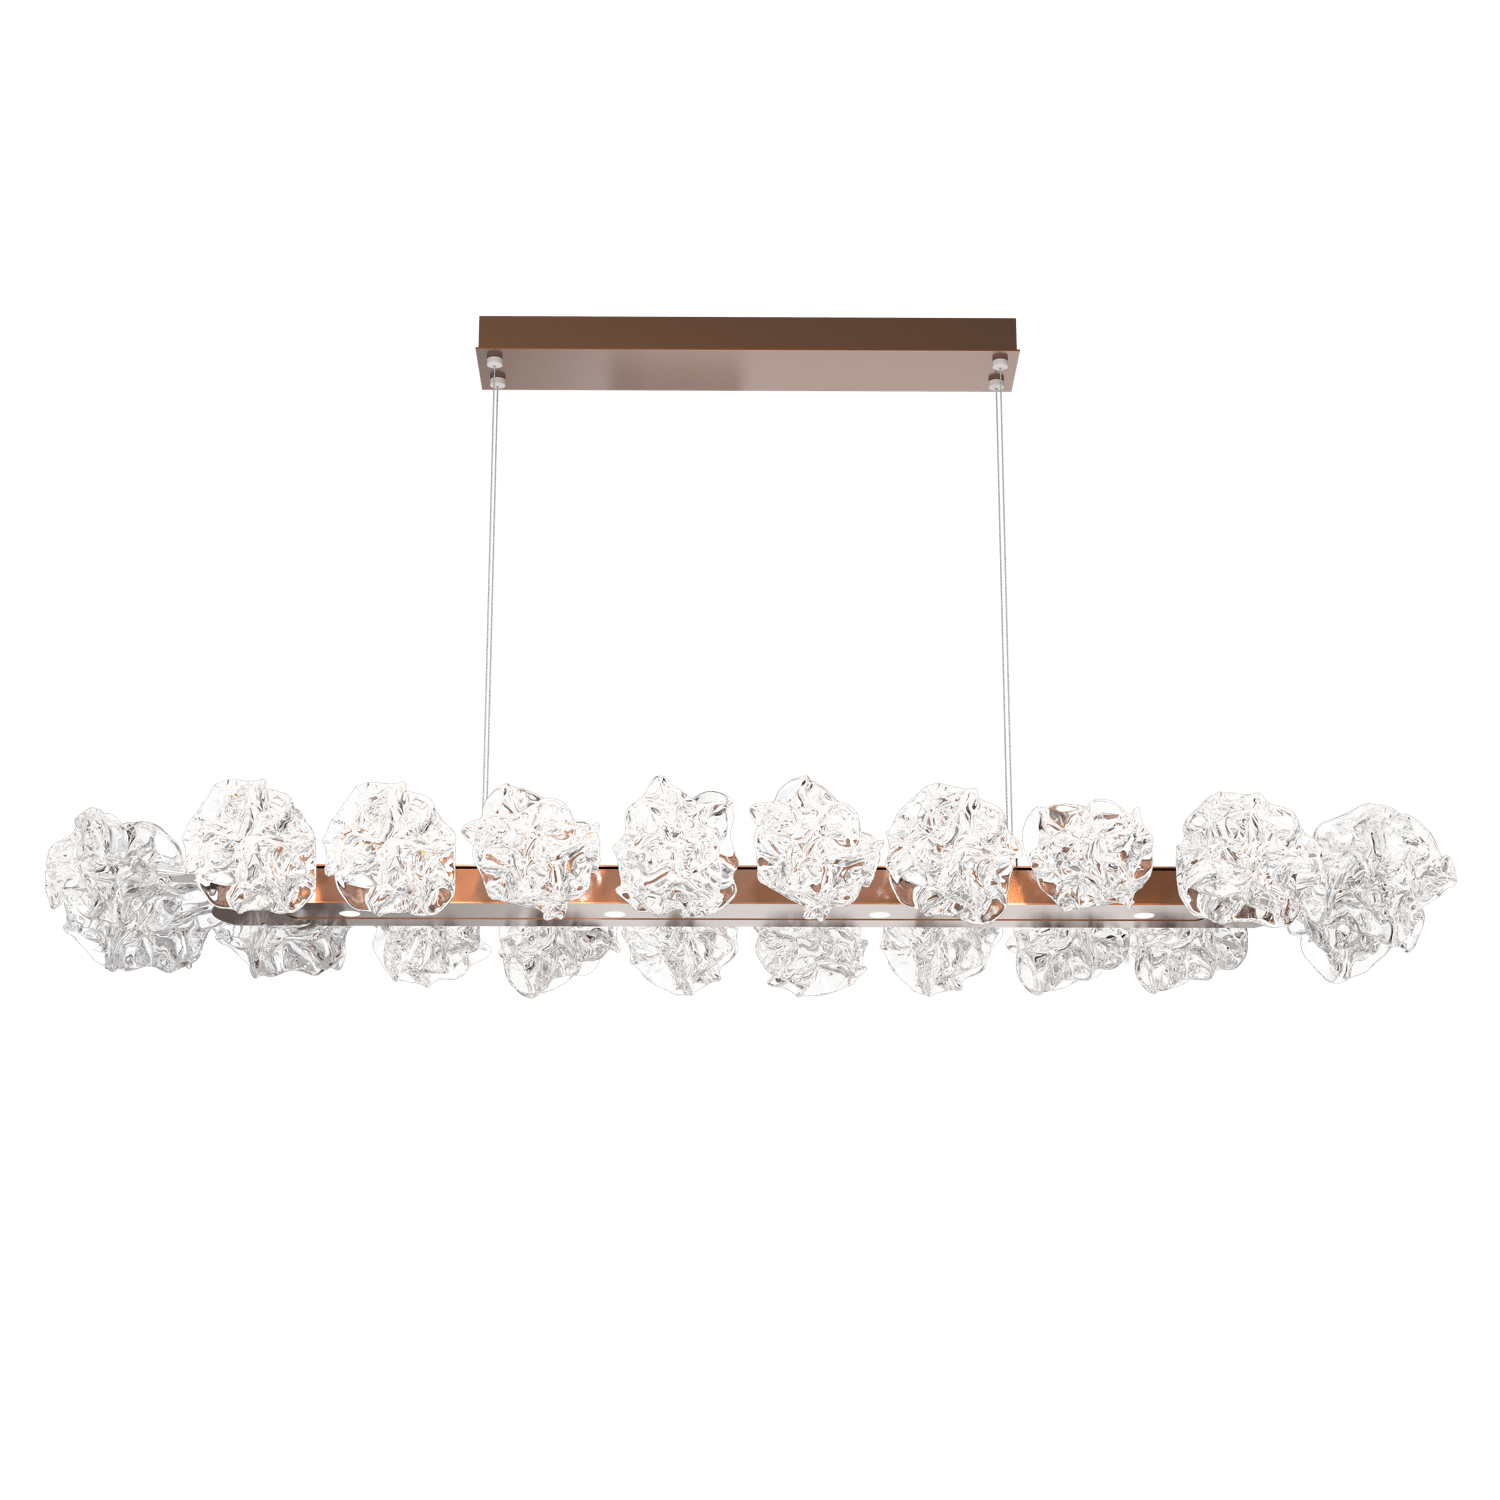 PLB0059-60-BB-Hammerton-Studio-Blossom-60-inch-linear-chandelier-with-burnished-bronze-finish-and-clear-handblown-crystal-glass-shades-and-LED-lamping